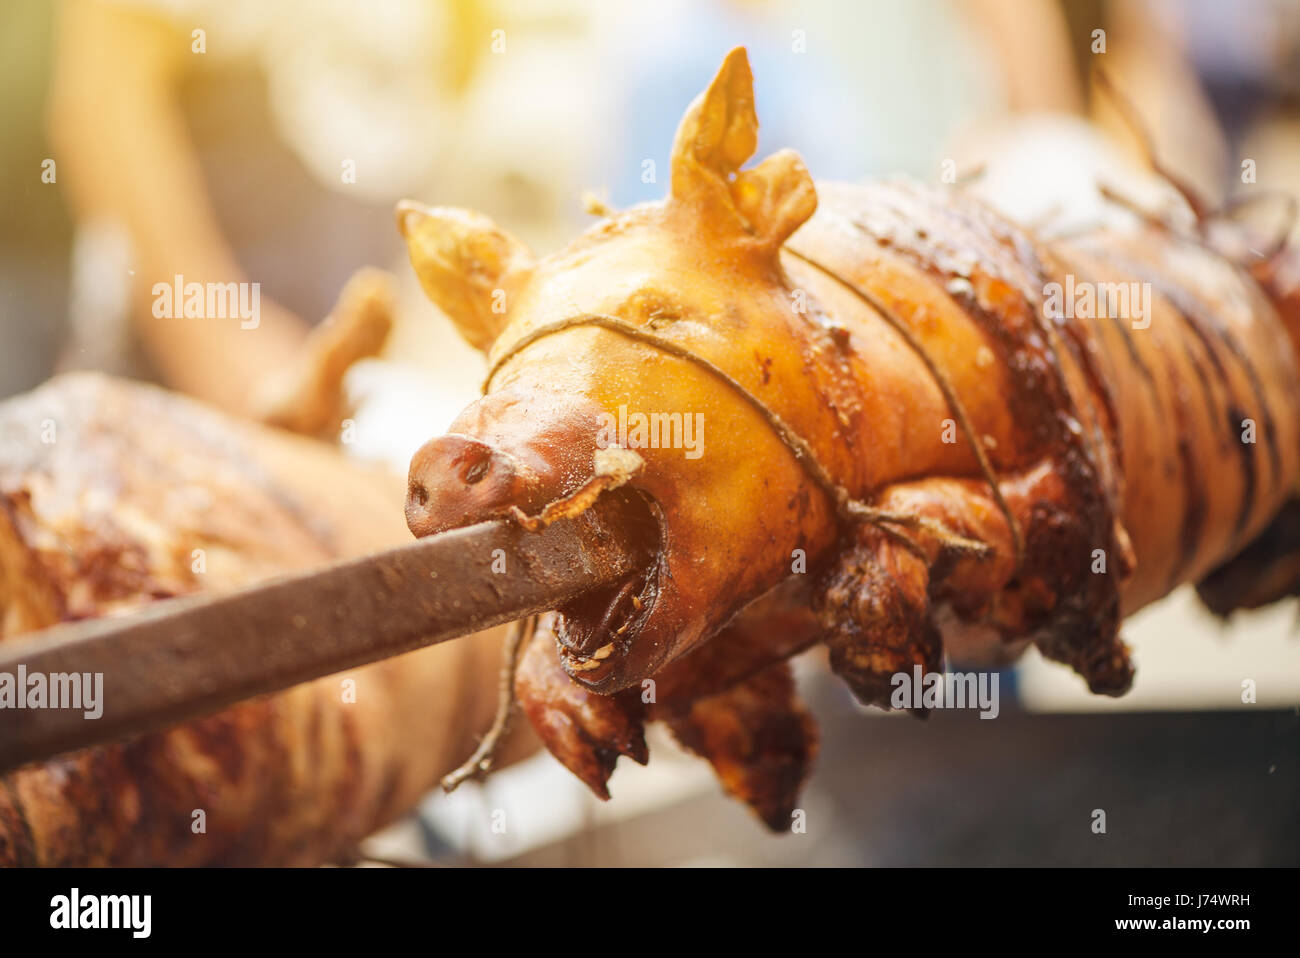 Spit roasted pig, traditional outdoor food preparation, selective focus Stock Photo